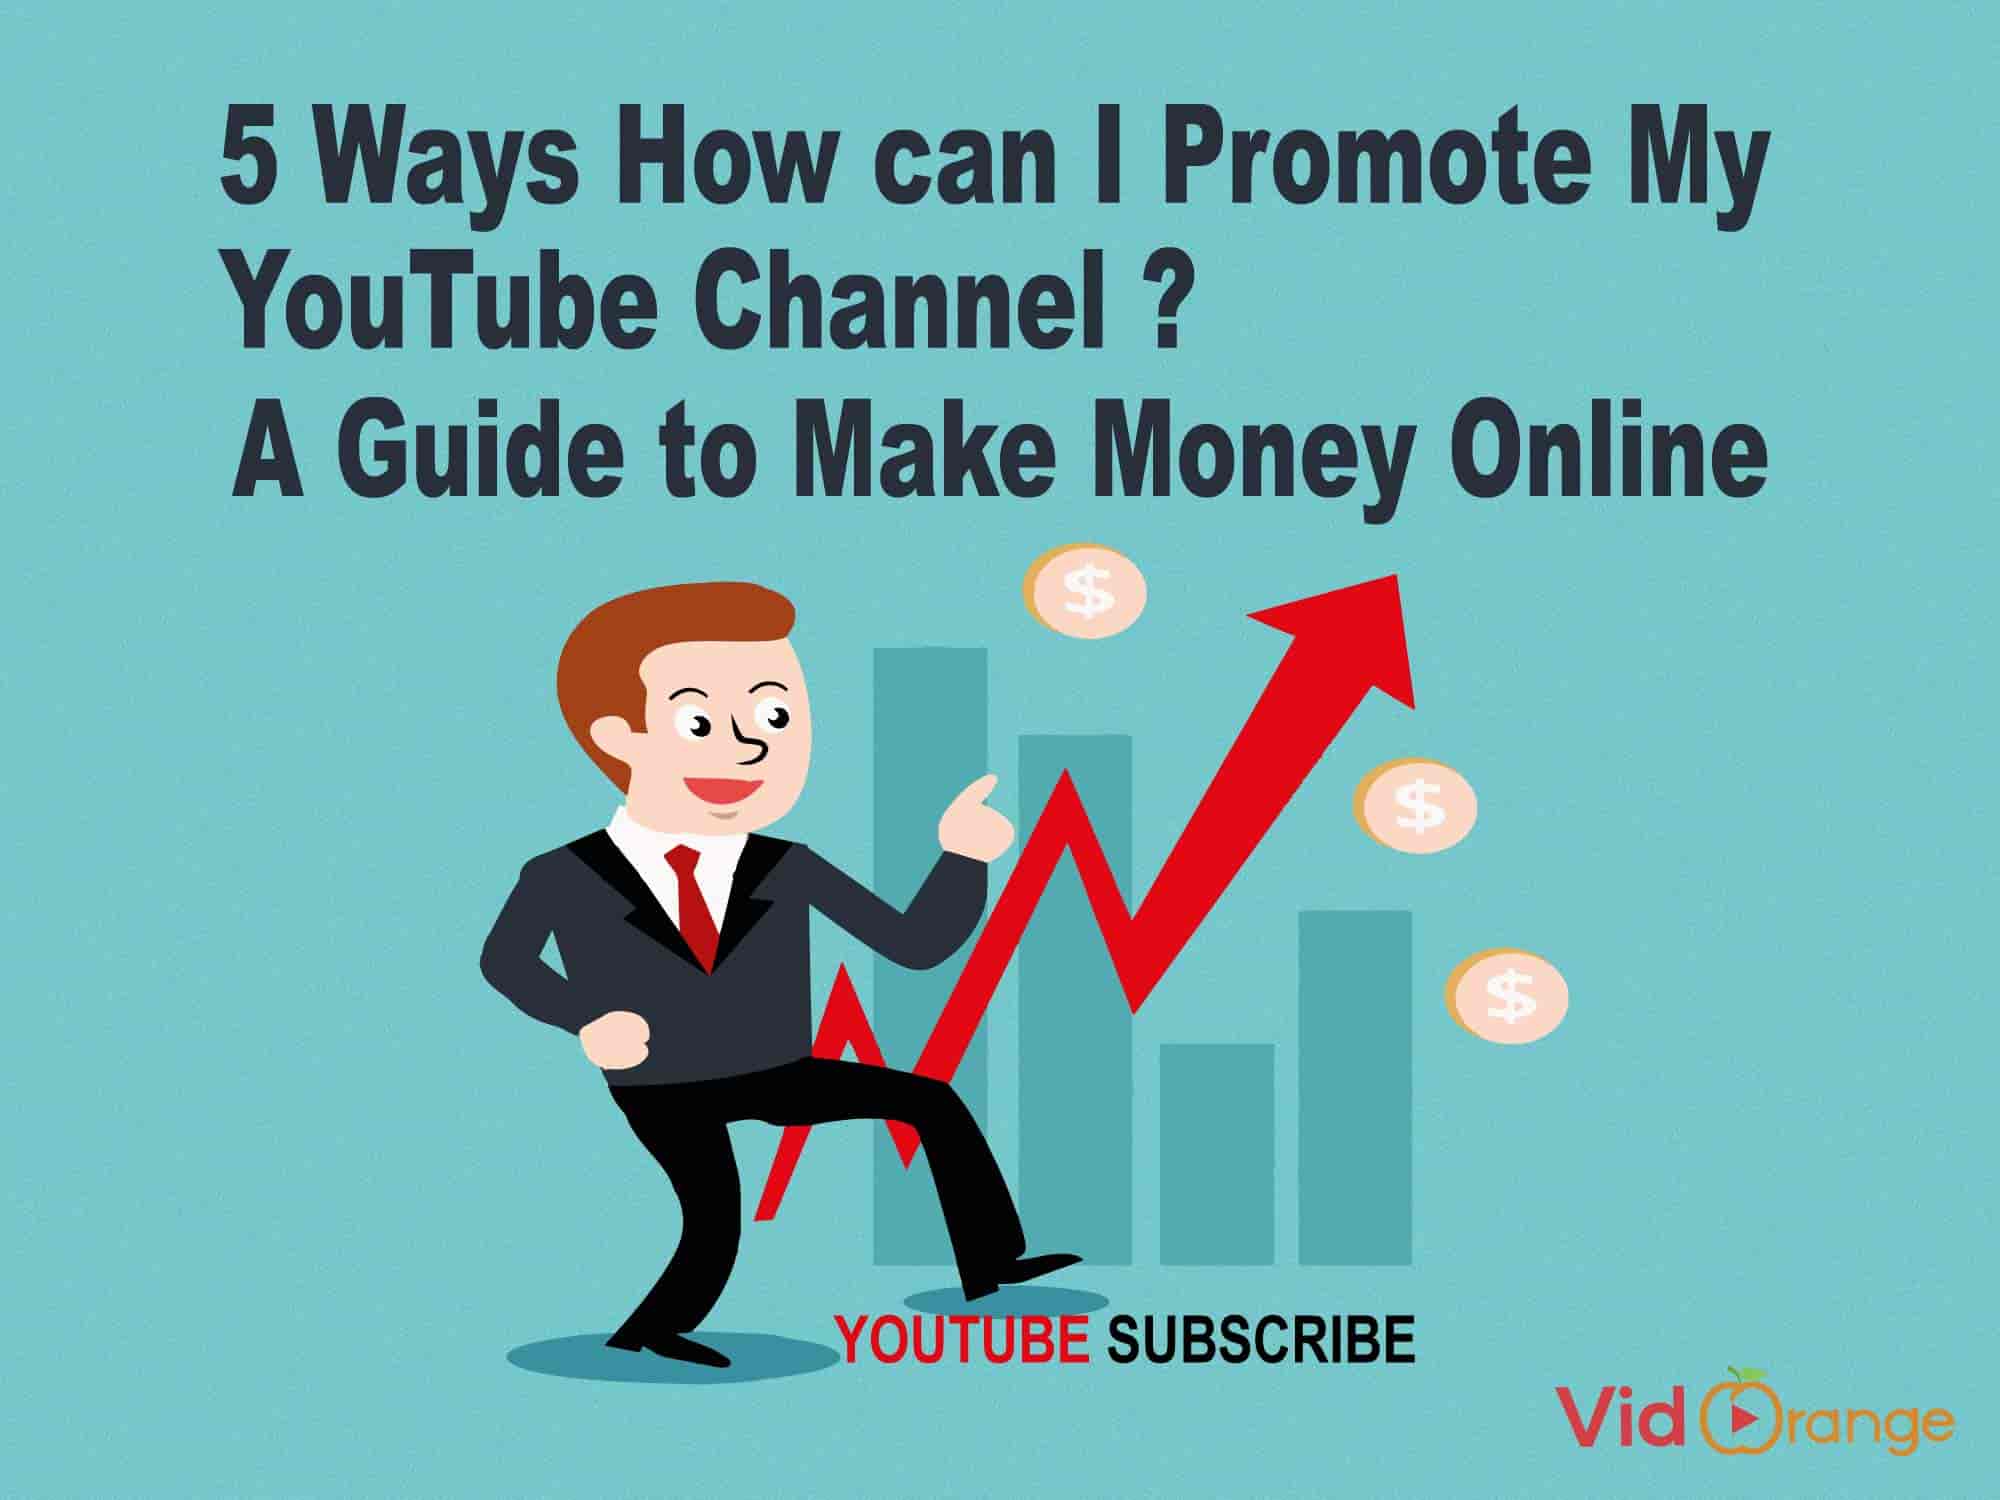 5 Ways How can I Promote My YouTube Channel | A Guide to Make Money Online